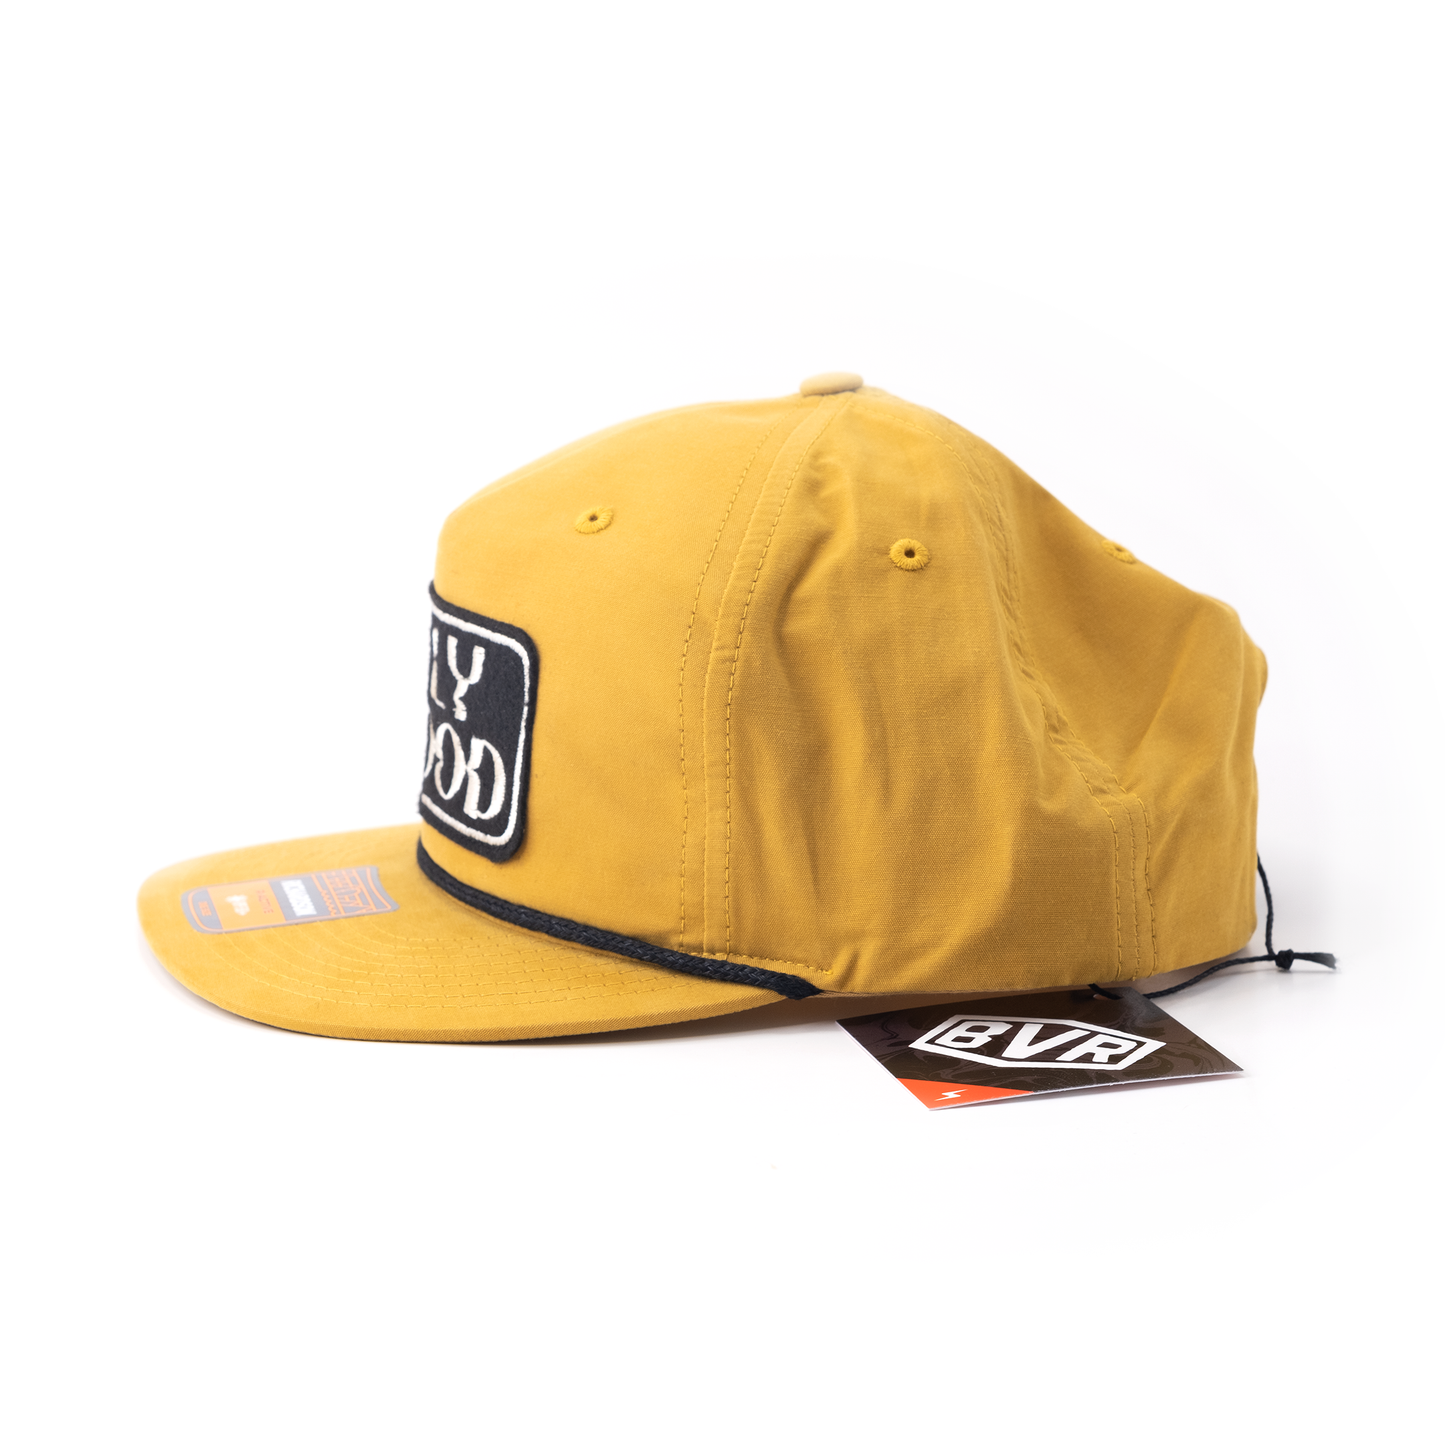 Fly Good Camp Hat - Yellow